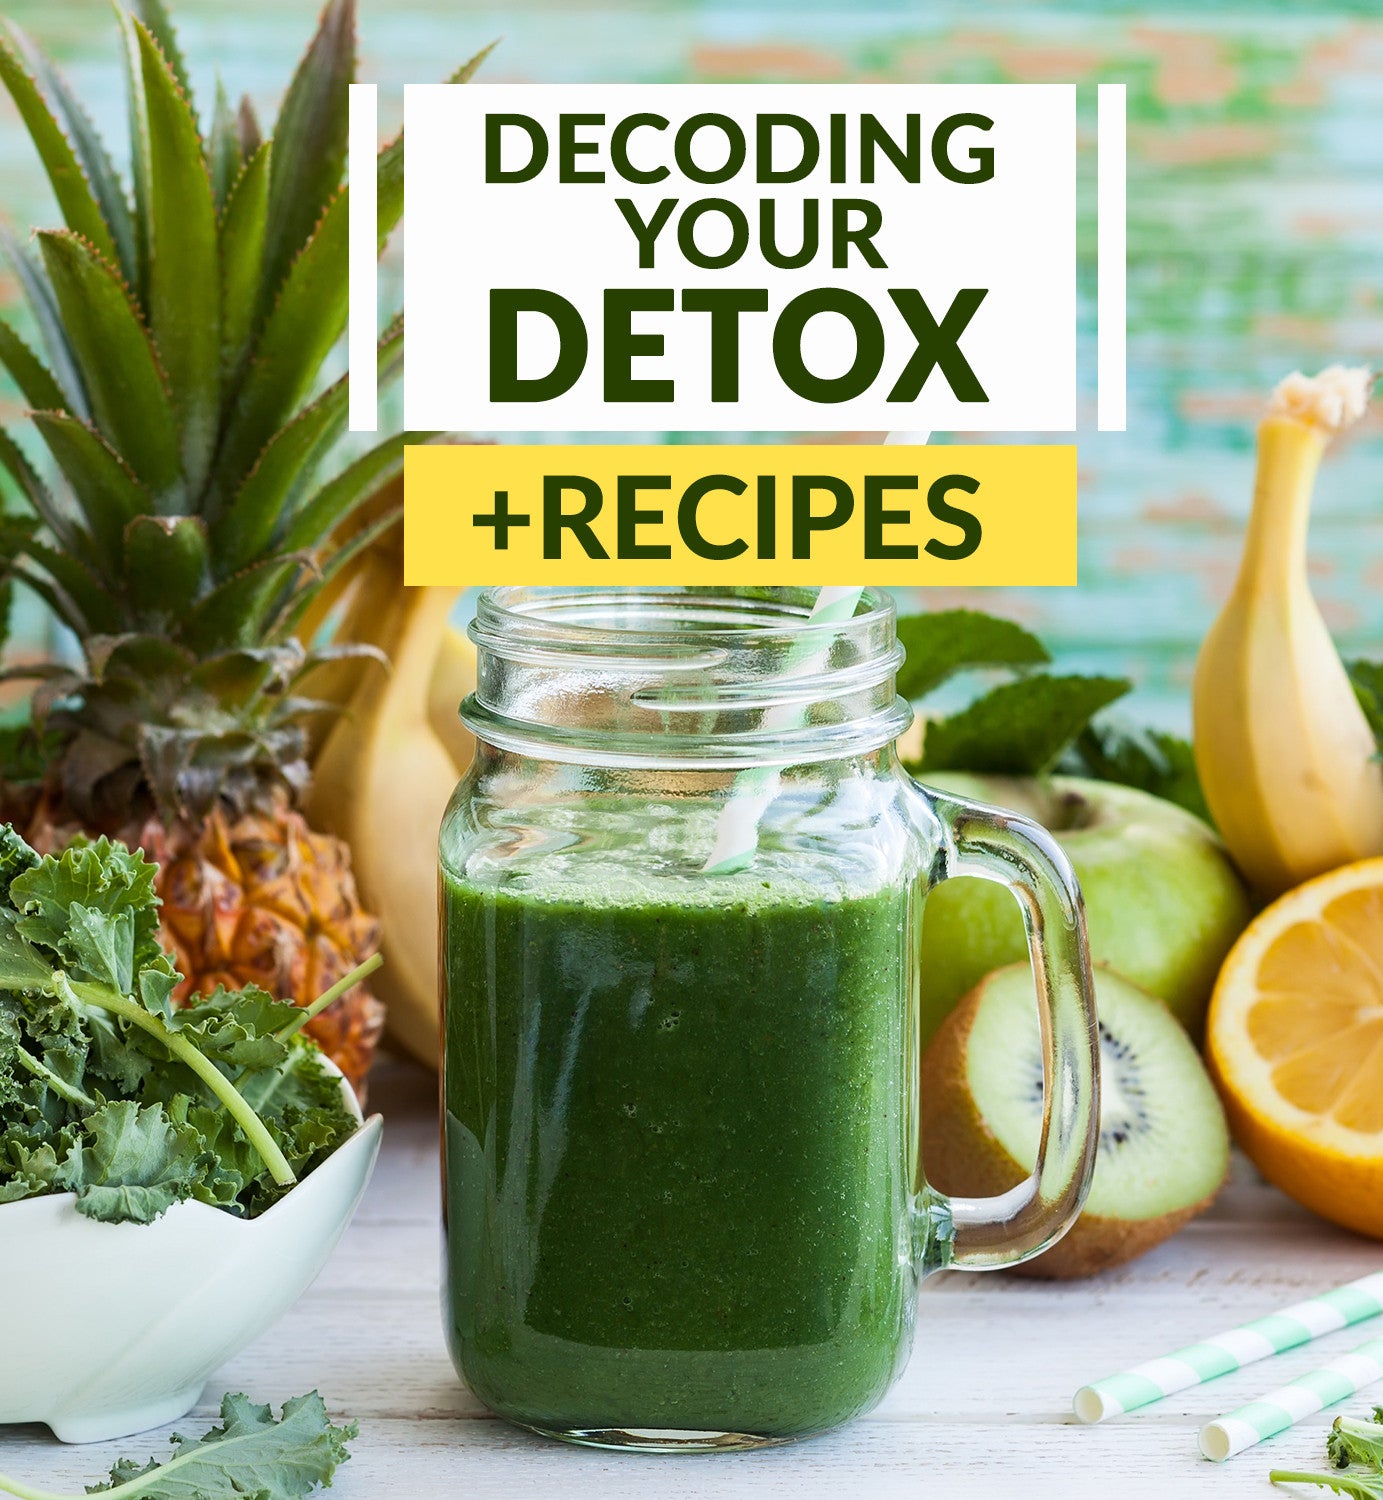 Decoding Your Detox - Tips, Tricks and Recipes - Goodness Me!